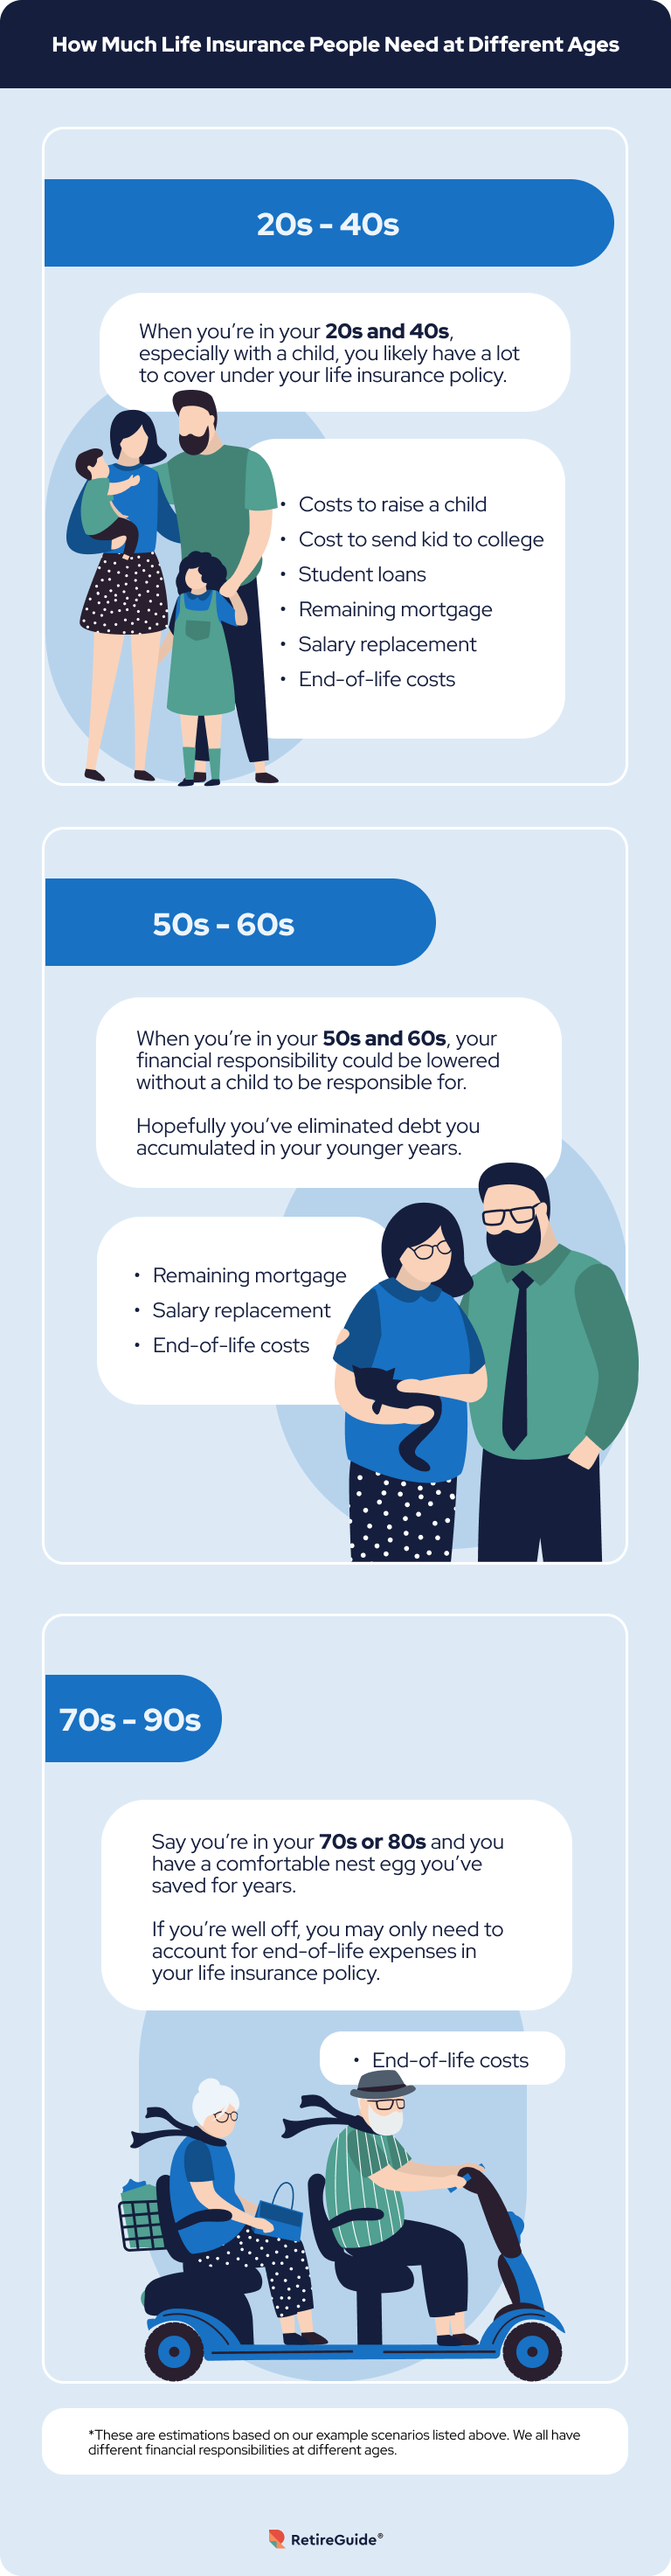 How Much Life Insurance People Need at Different Ages Infographic